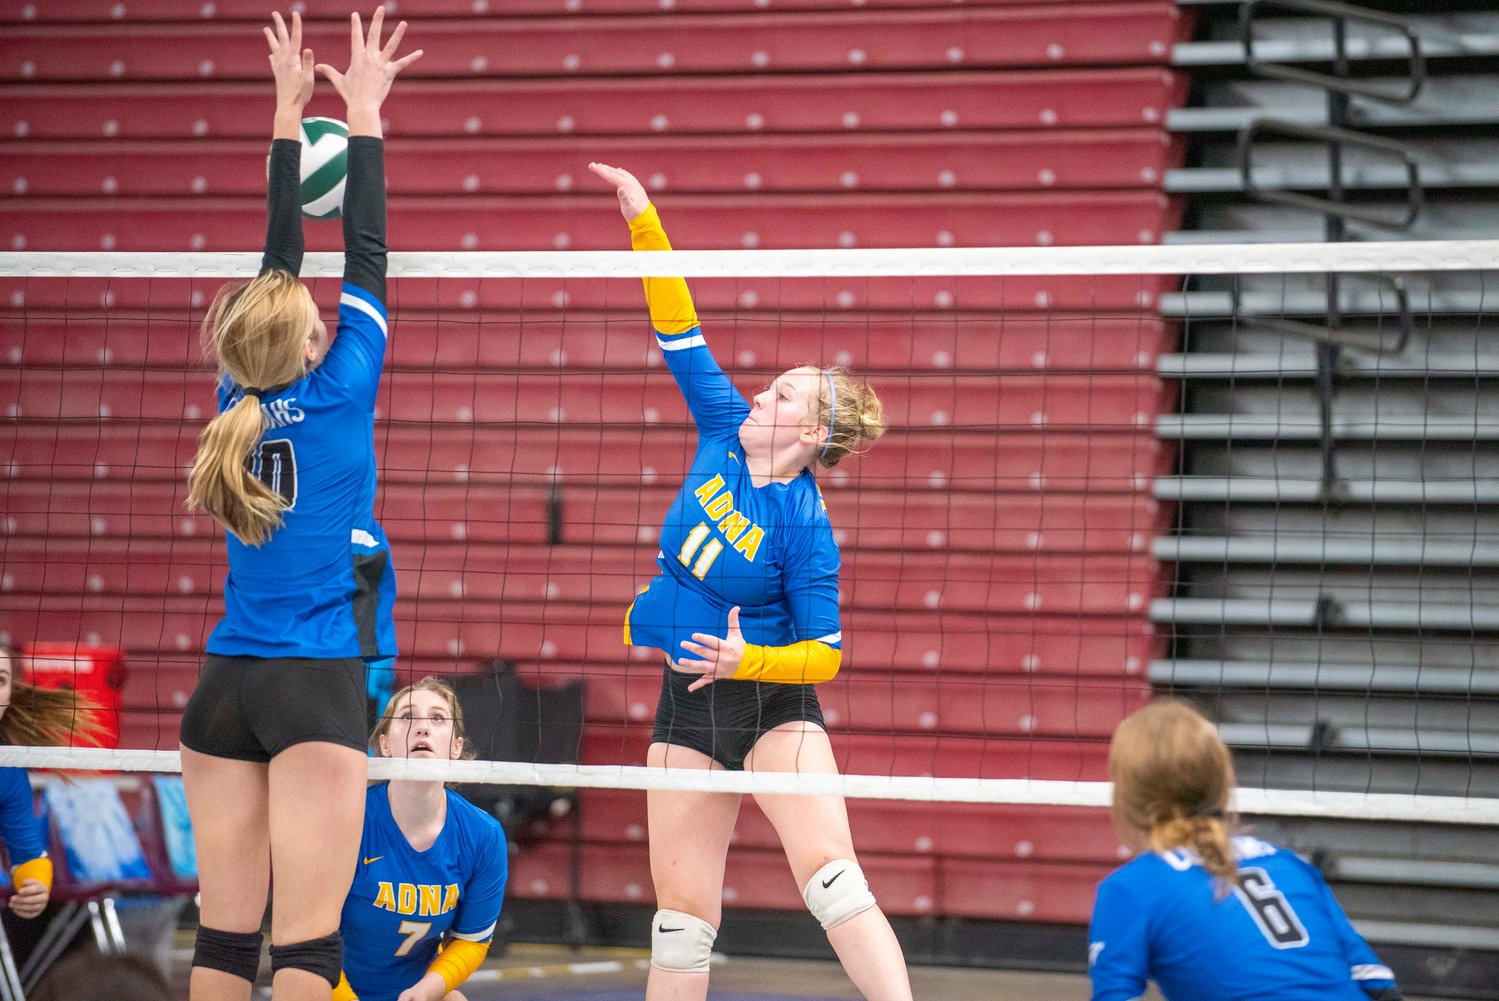 Adna’s Kendall Humphrey (11) spikes against Warden in a loser-out match Thursday in Yakima